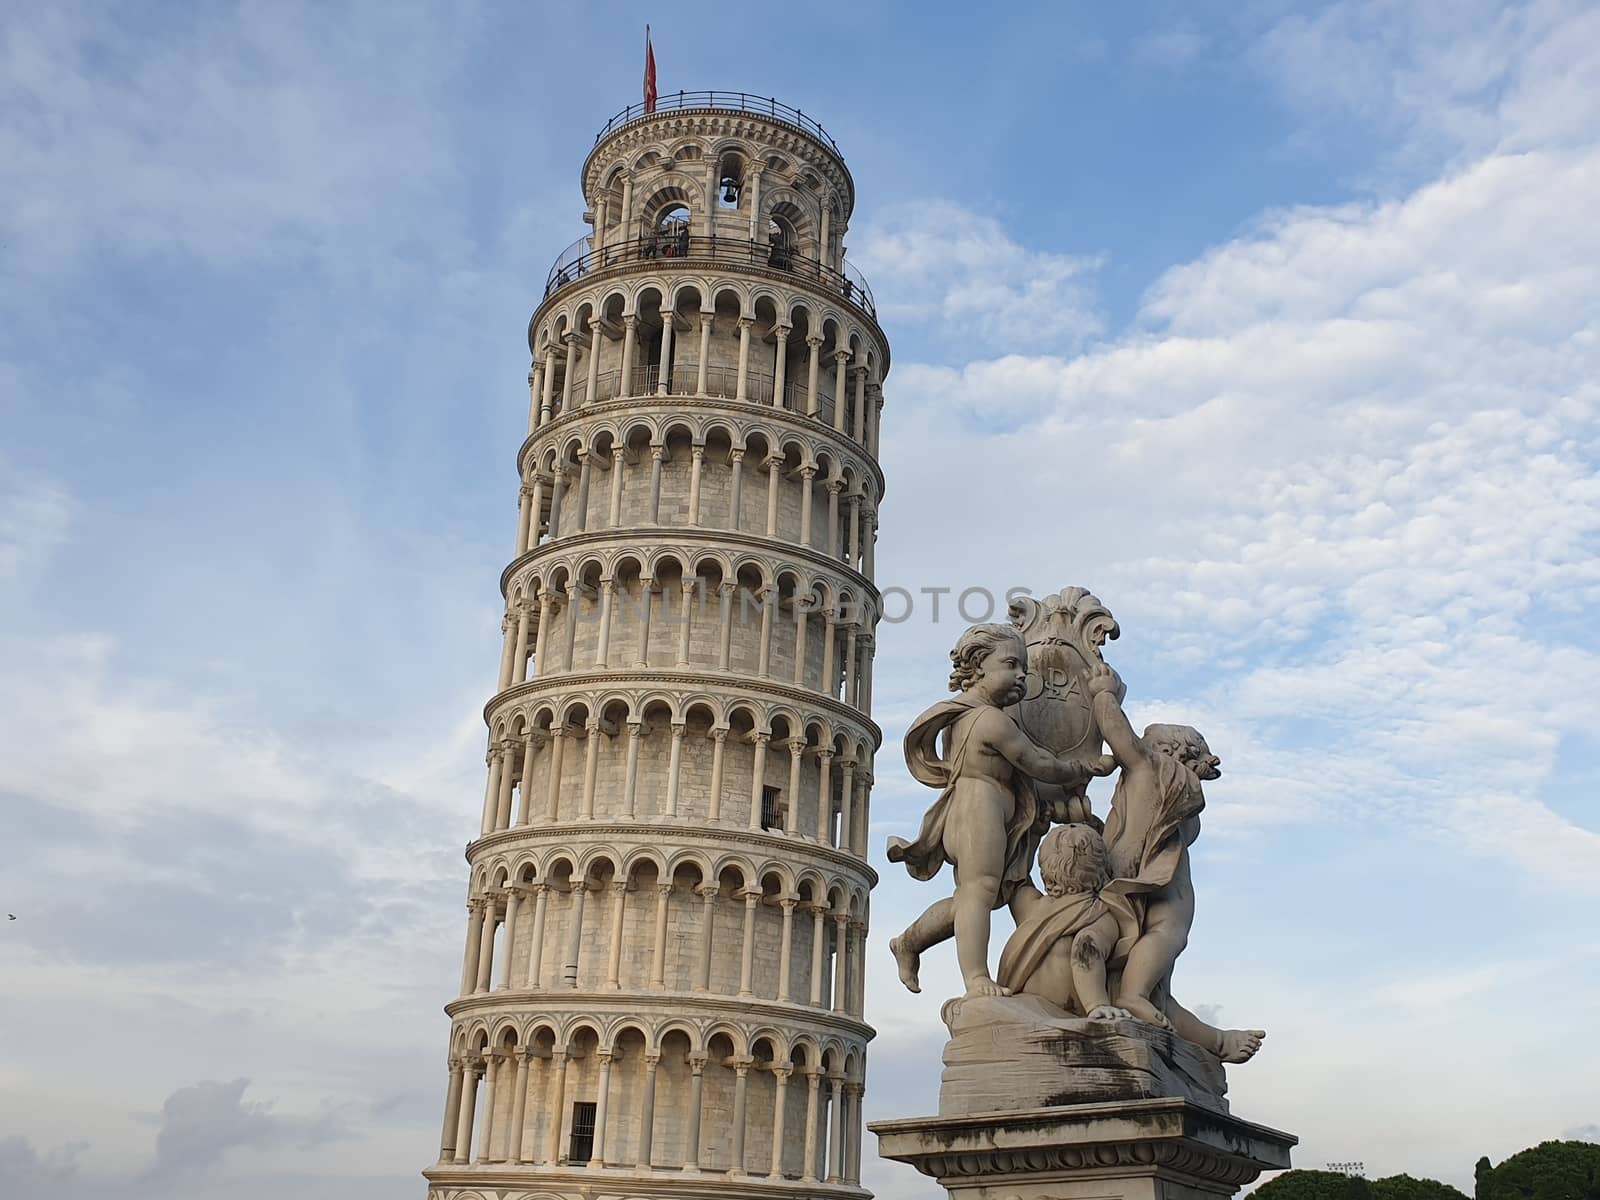 The leaning tower of Pisa and Piazza dei Miracoli in a sunny day - The Miracle Square, the Leaning Tower and the Cathedral is visited everyday by thousand of tourists - Pisa, Tuscany, Italy by matteobartolini